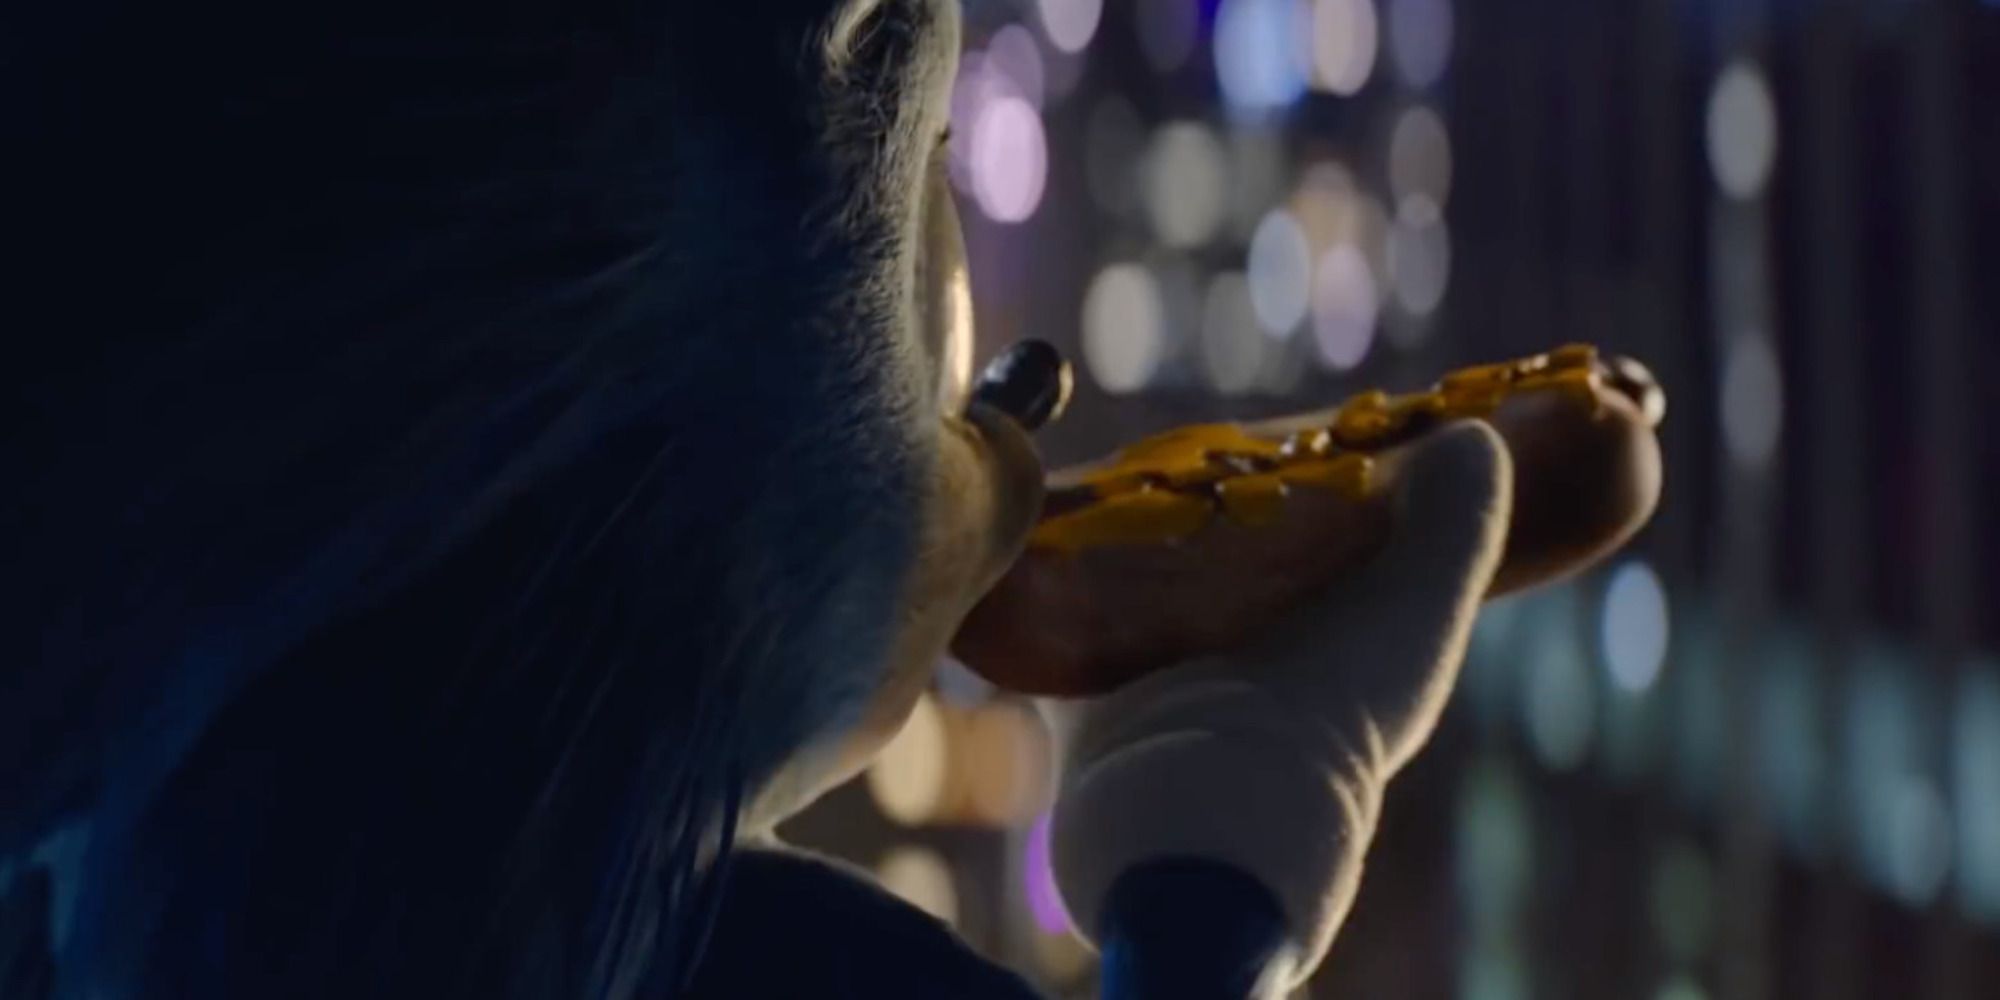 Sonic eating a chili dog in Sonic the Hedgehog 2